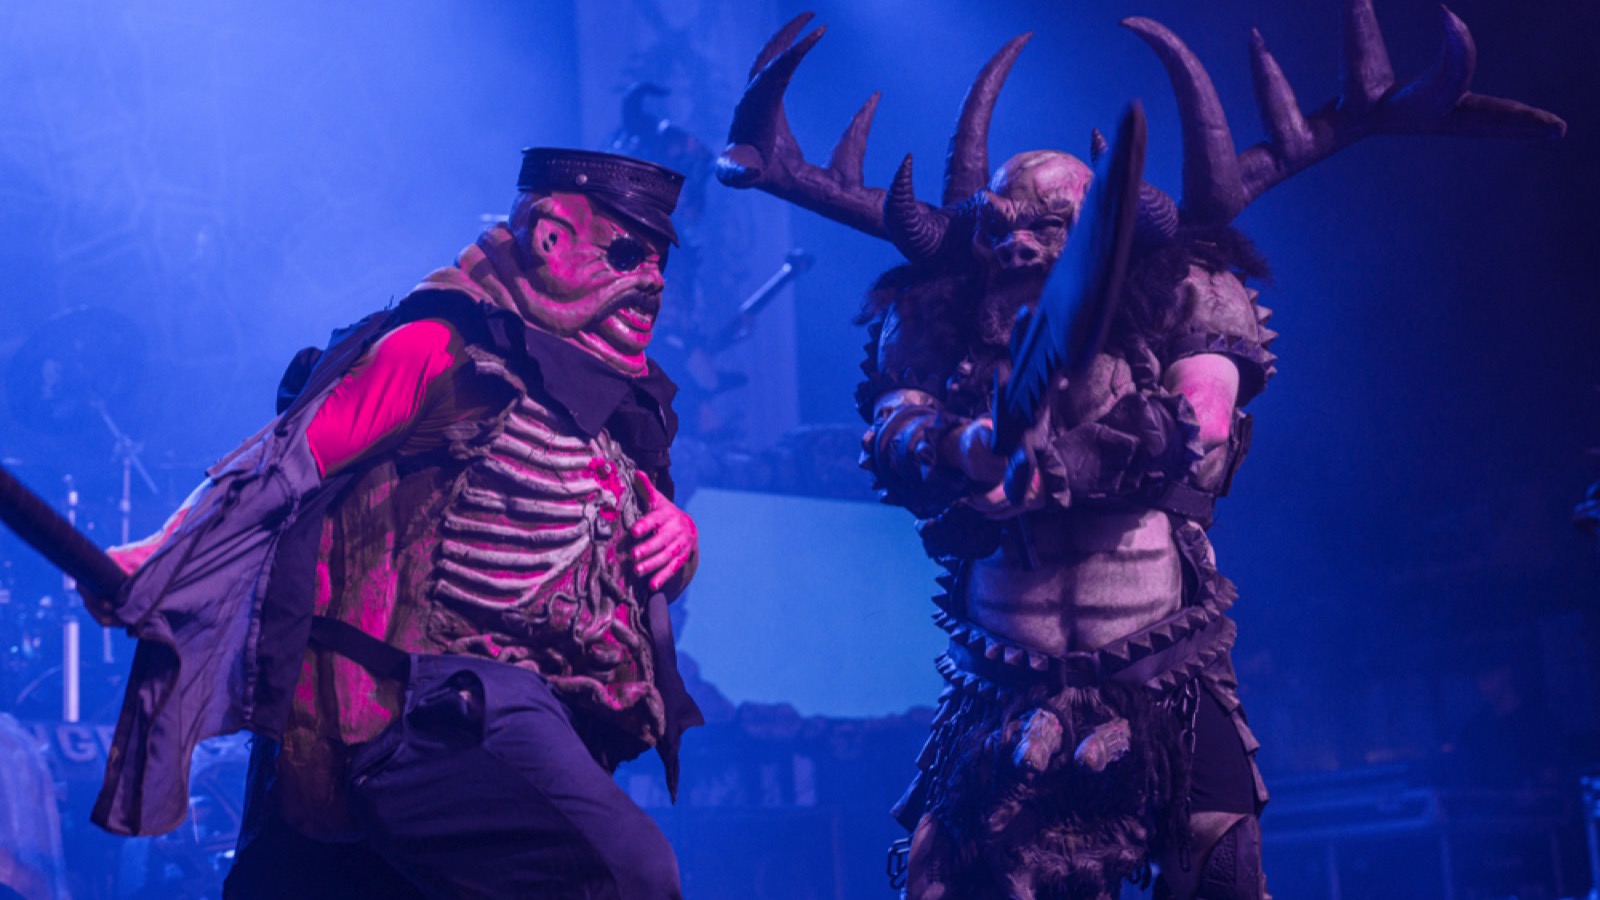 Detroit, Michigan / USA - 09-18-2019: GWAR performing live at the Majestic Theater in Detroit